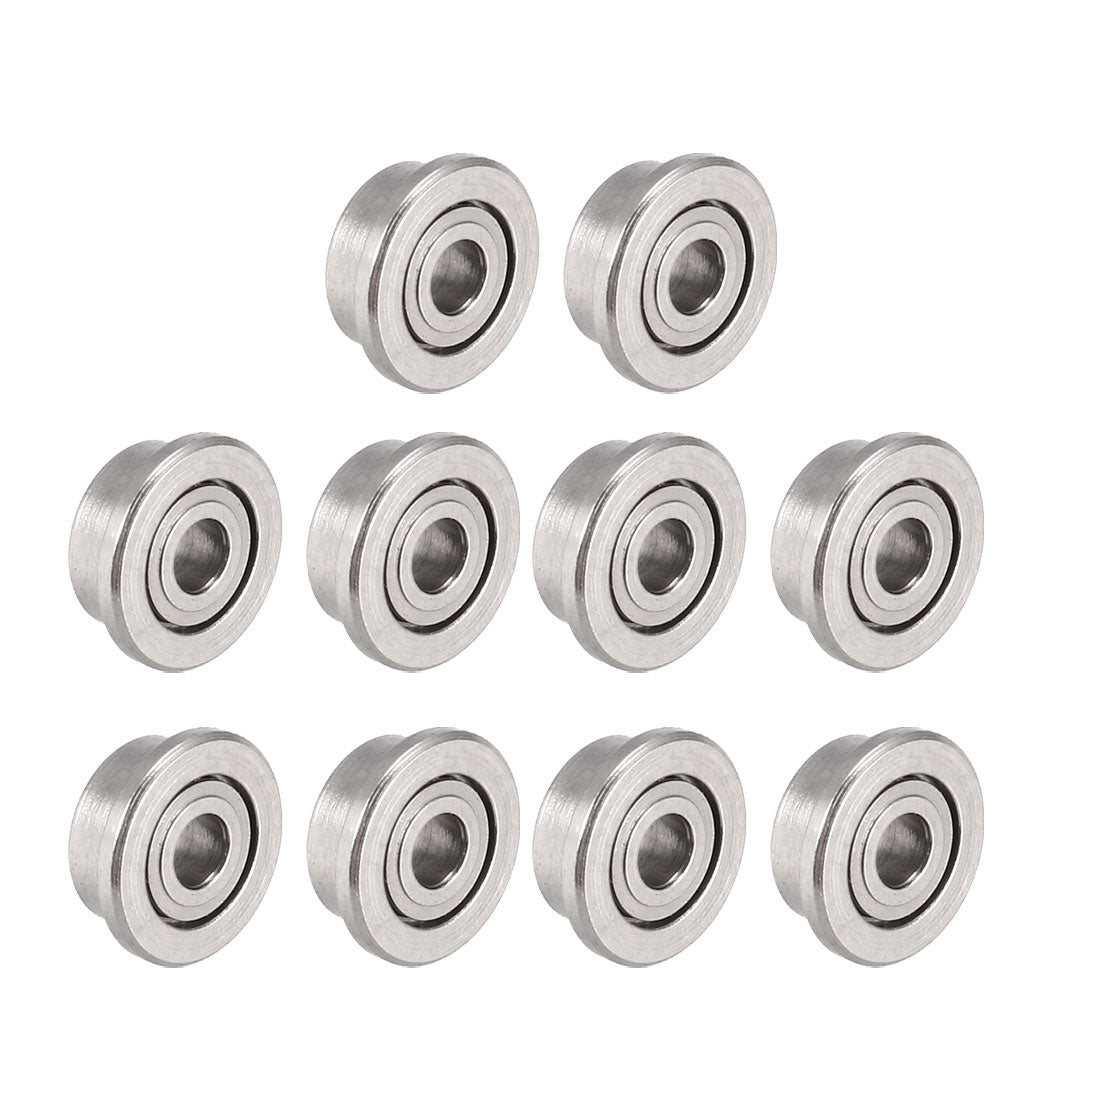 uxcell Uxcell F681XZZ Flange Ball Bearing 1.5x4x2mm Double Metal Shielded (GCr15) Chrome Steel Bearings 10pcs